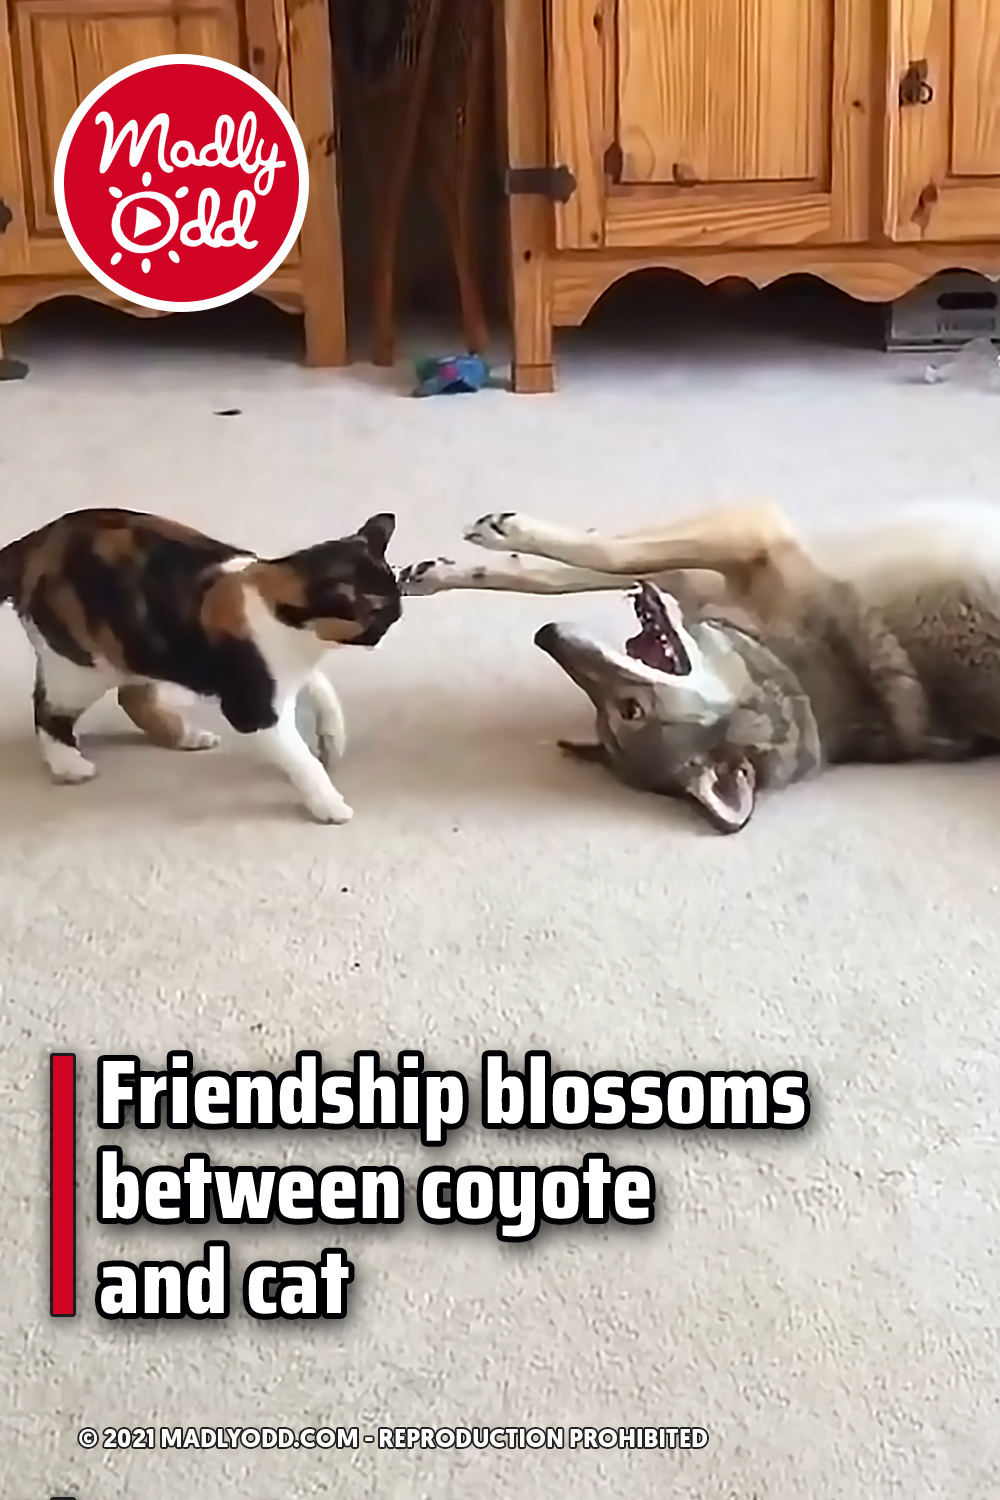 Friendship blossoms between coyote and cat